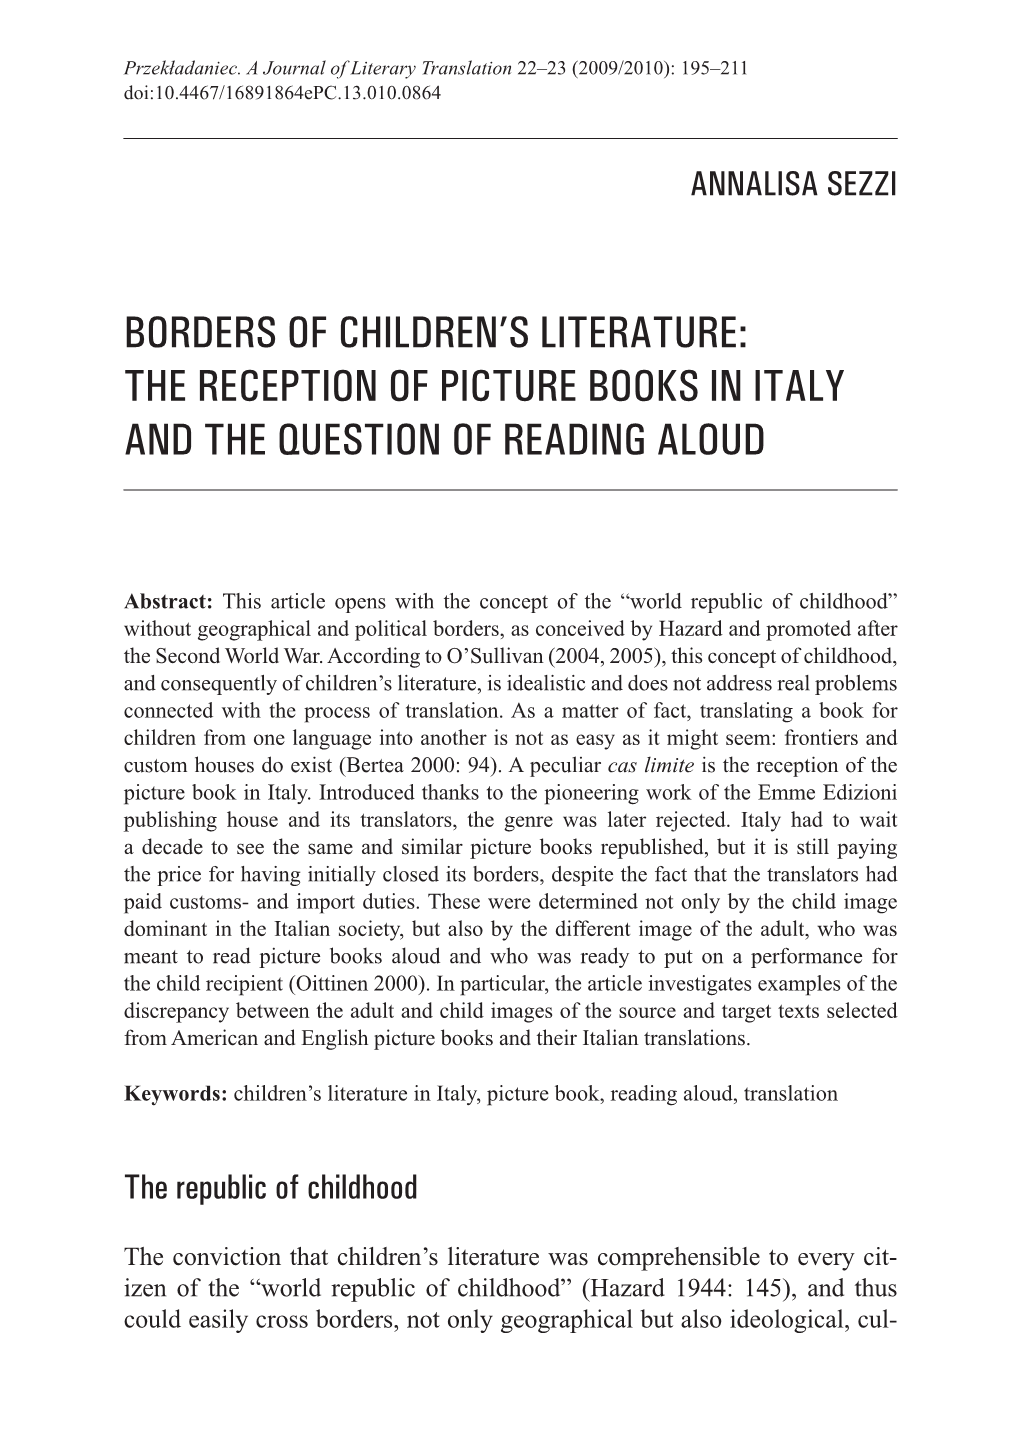 Borders of Children's Literature: the Reception of Picture Books in Italy